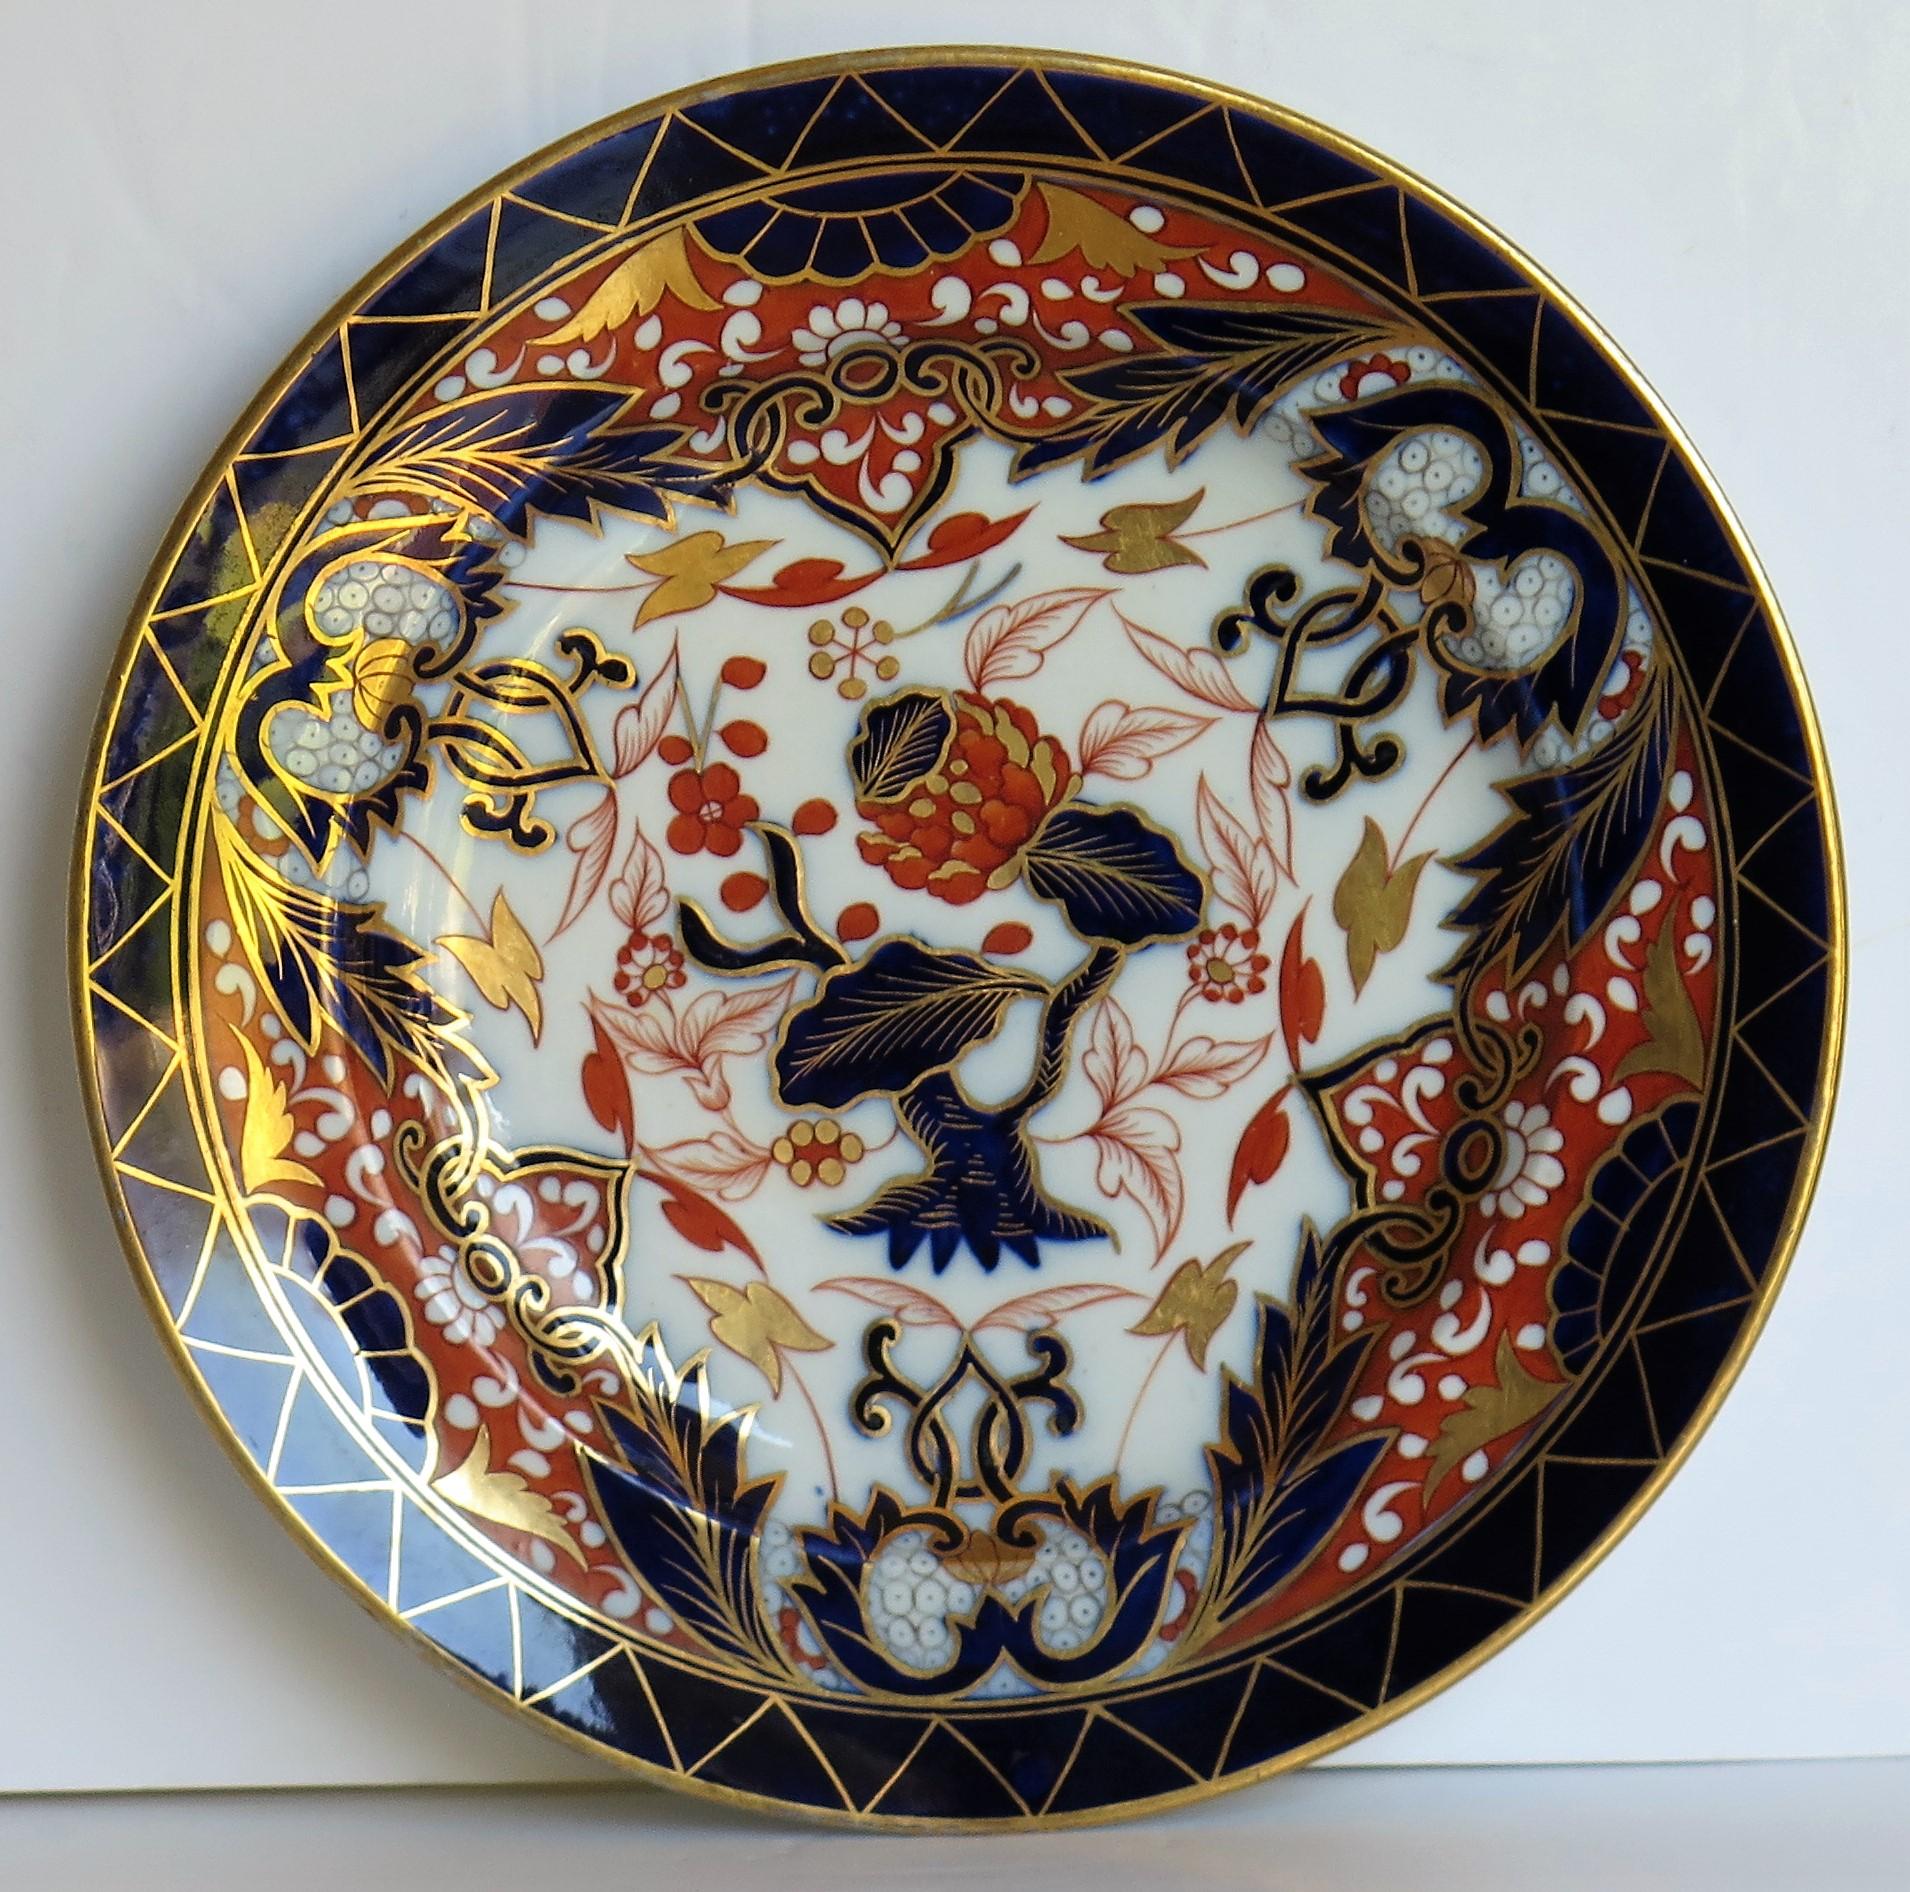 Hand-Painted Early Davenport Porcelain Plate in Imari King's Pattern 330, English, circa 1820